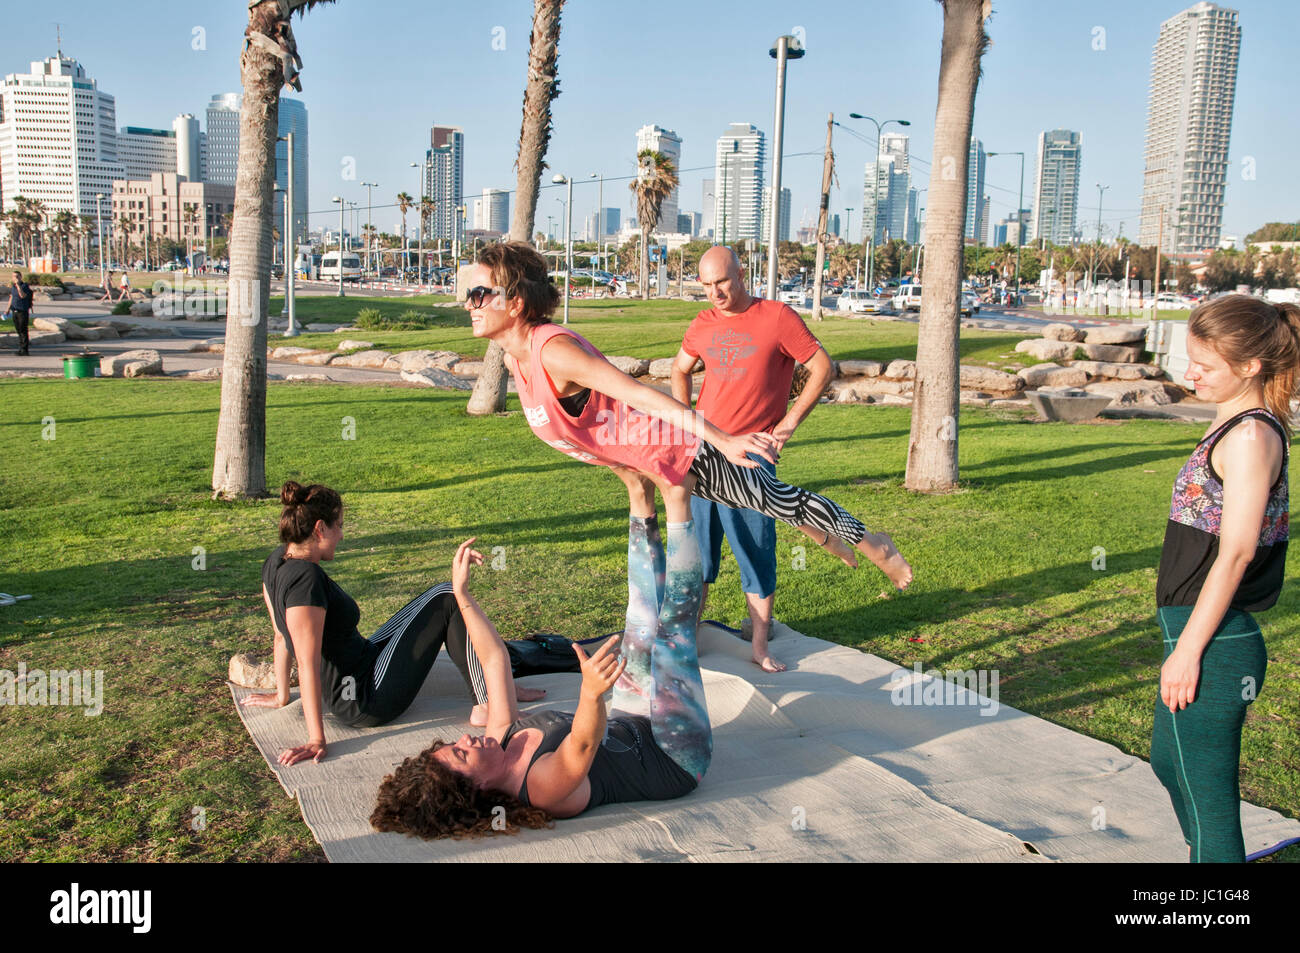 Acro Yoga practice session in Charles Clore Park on the Jaffa shore, Israel Stock Photo